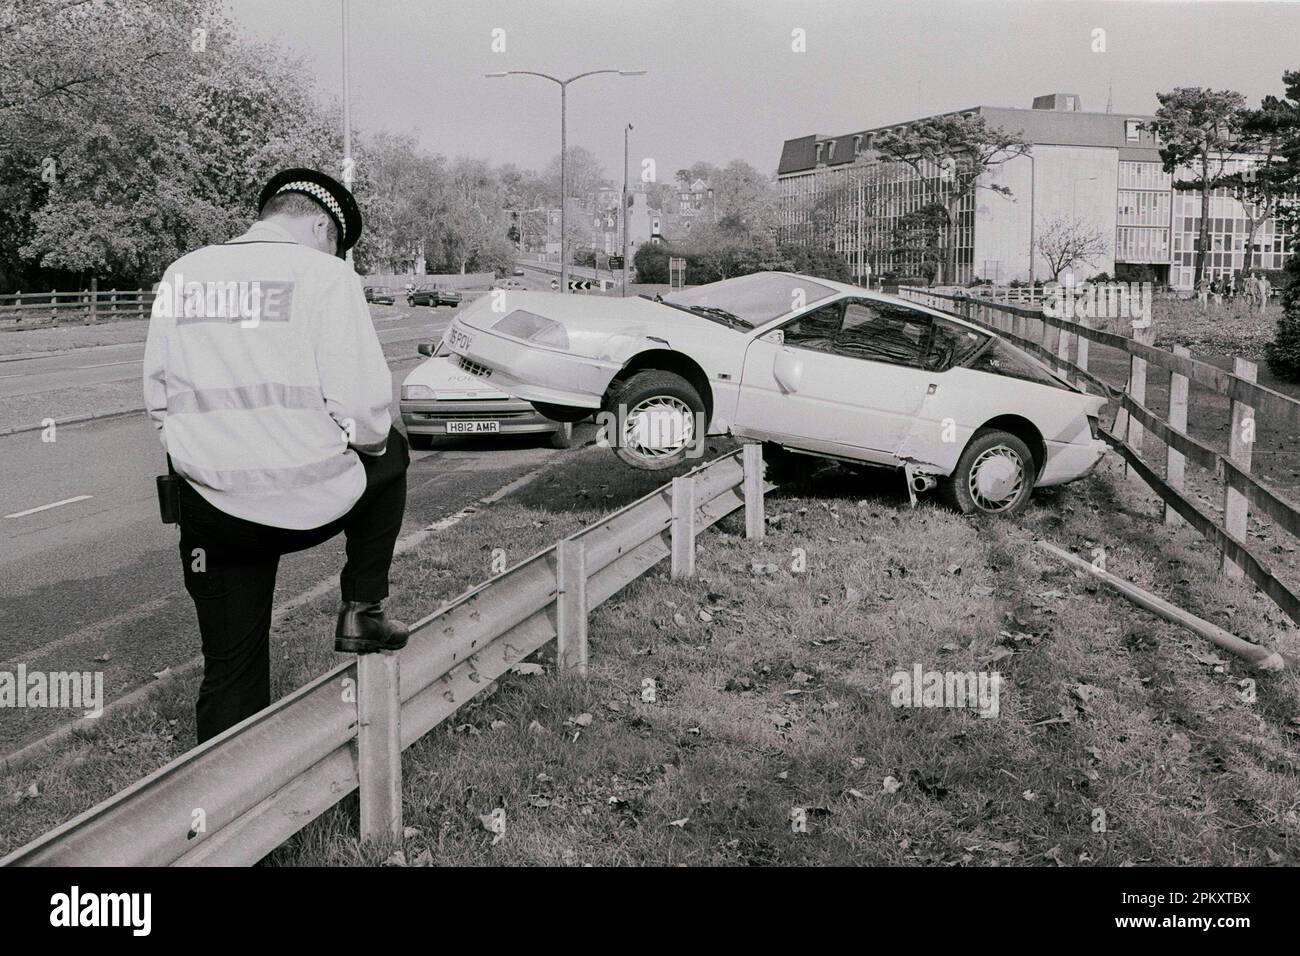 A crashed mid 90s Renault Alpine balances on the crash barrier beside the ring road in Salisbury, Wiltshire UK. Circa 1995. No injuries were sustained. Stock Photo